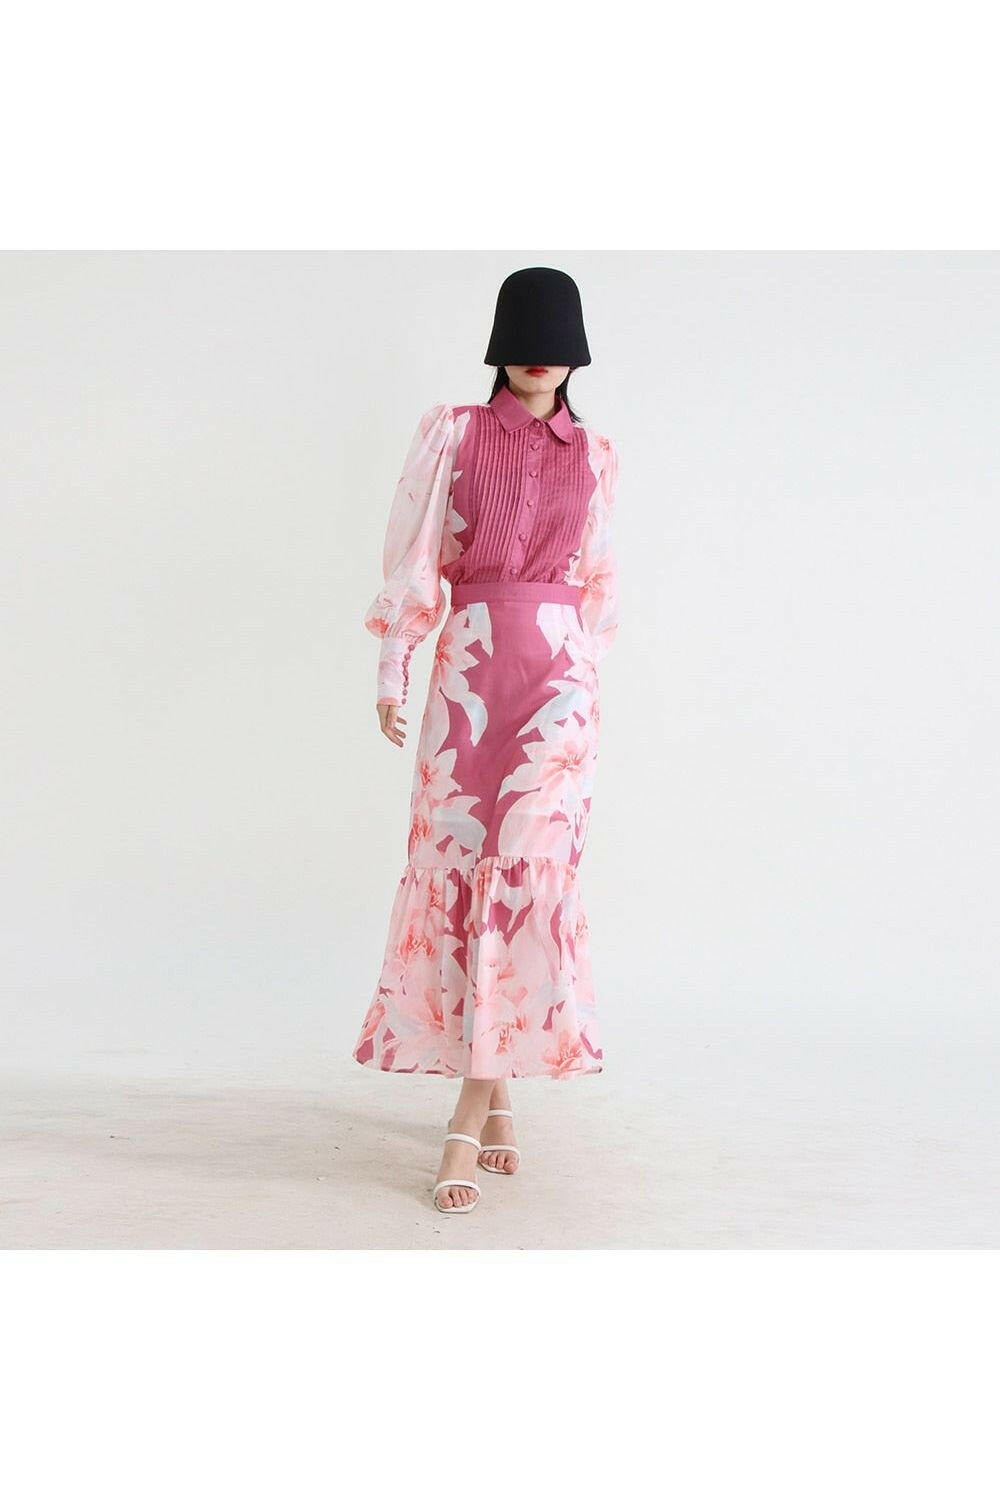 Slim Two Piece Sets For Women Lapel Lantern Sleeve - Pleated Skirts Printing Hit Color Set.